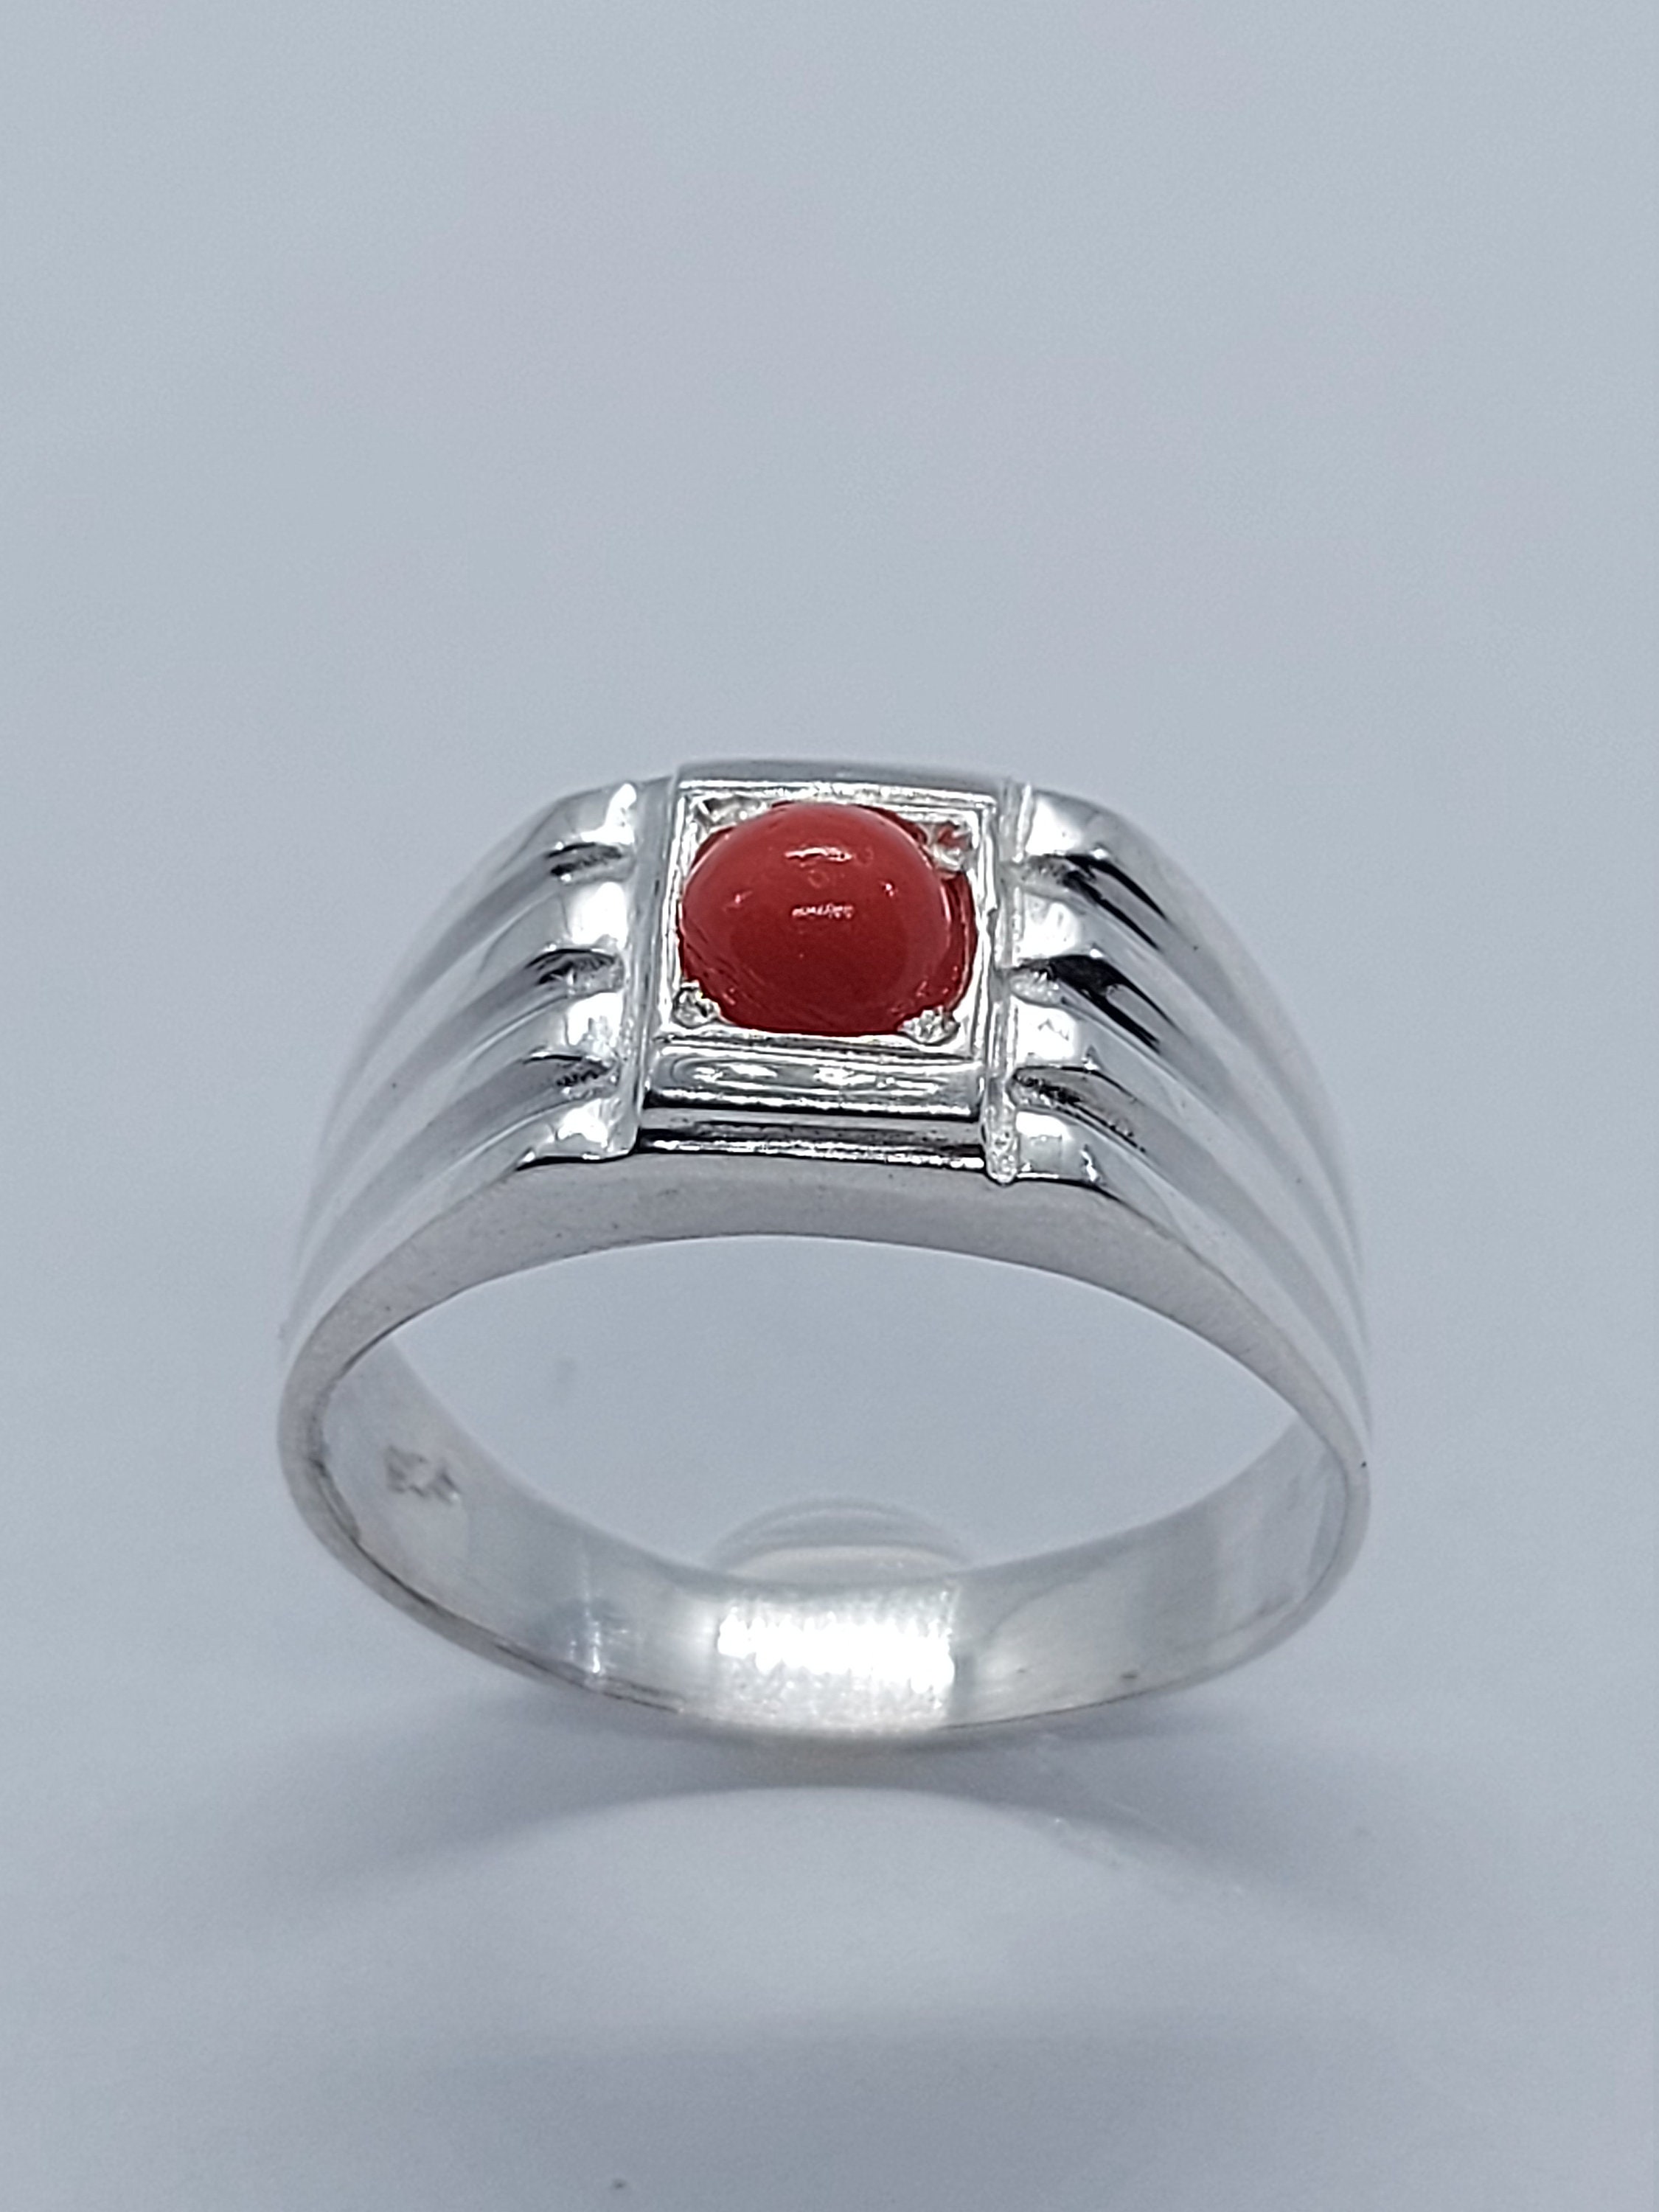 Amazon.com: 6 Carat Natural Australian Red Coral Mens Plain Ring Sterling  Silver 925 Handmade Marjan Ring Gift for Him Religious Ring (4) : Handmade  Products